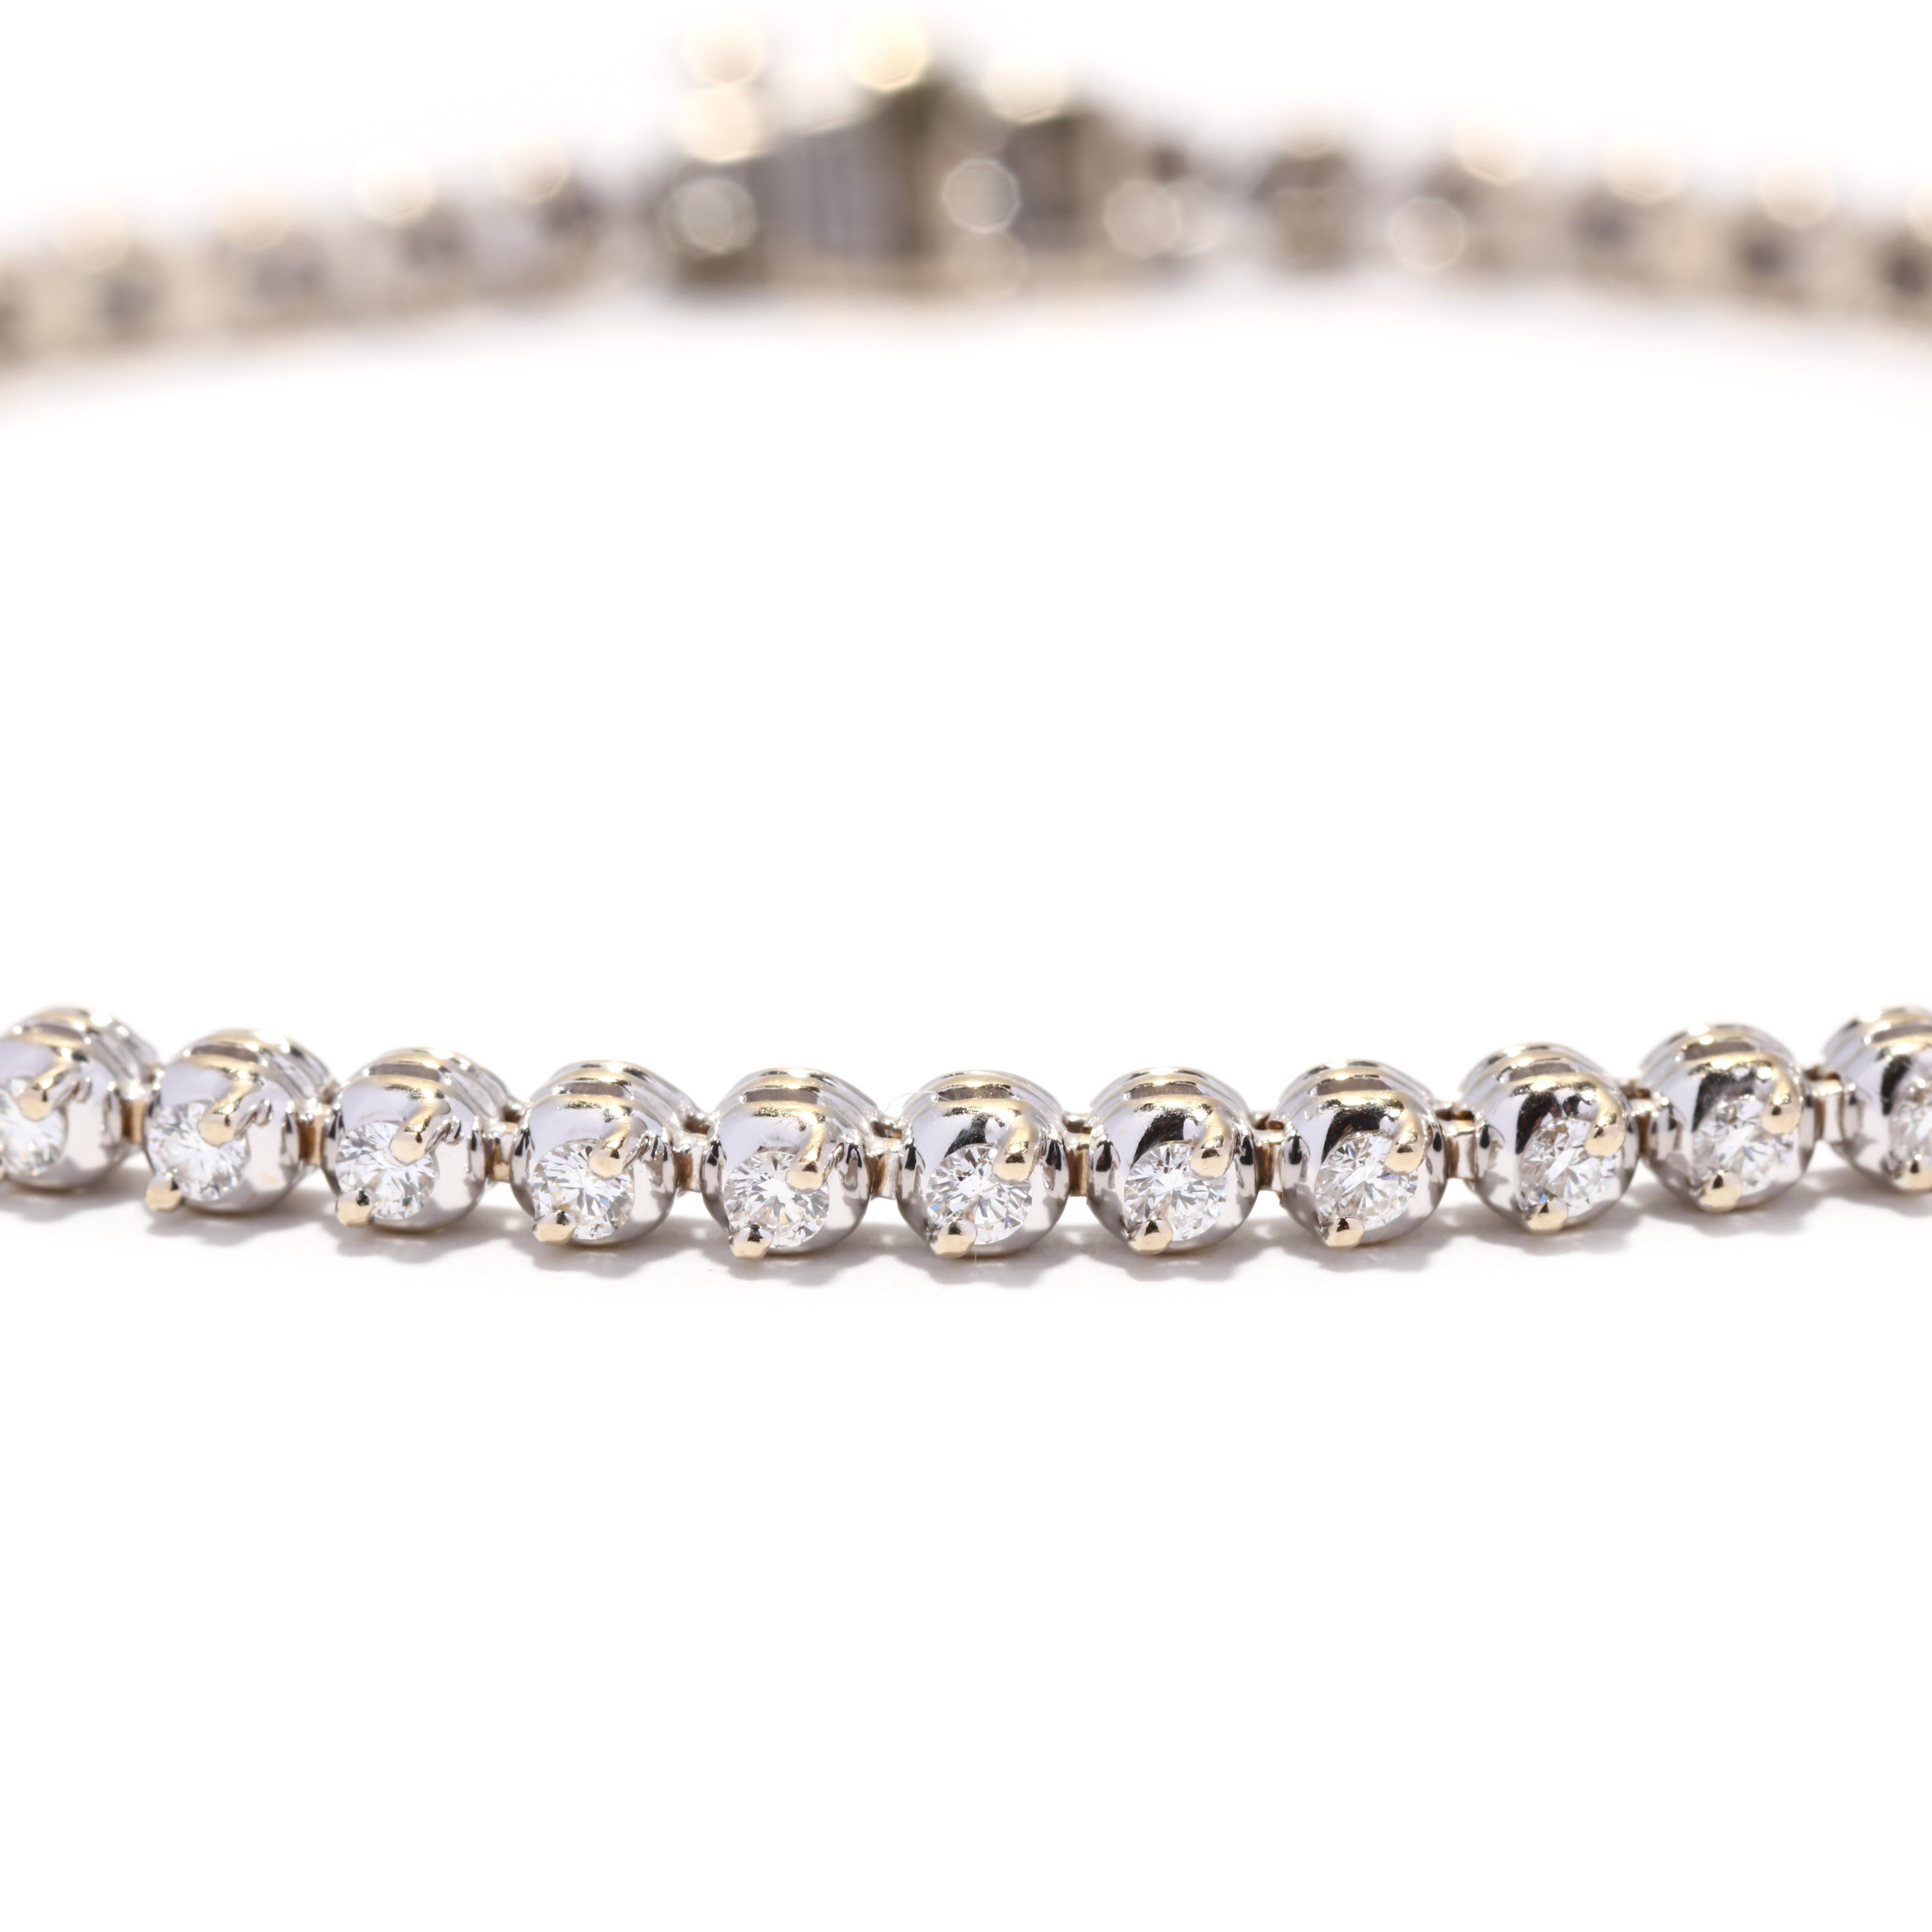 A vintage 18 karat white gold diamond tennis bracelet. This thin bracelet features small round links, with prong set full cut round diamonds weighing approximately 1.20 total carats and with a box clasp.

Stones:
- diamonds, 59 stones
- full cut